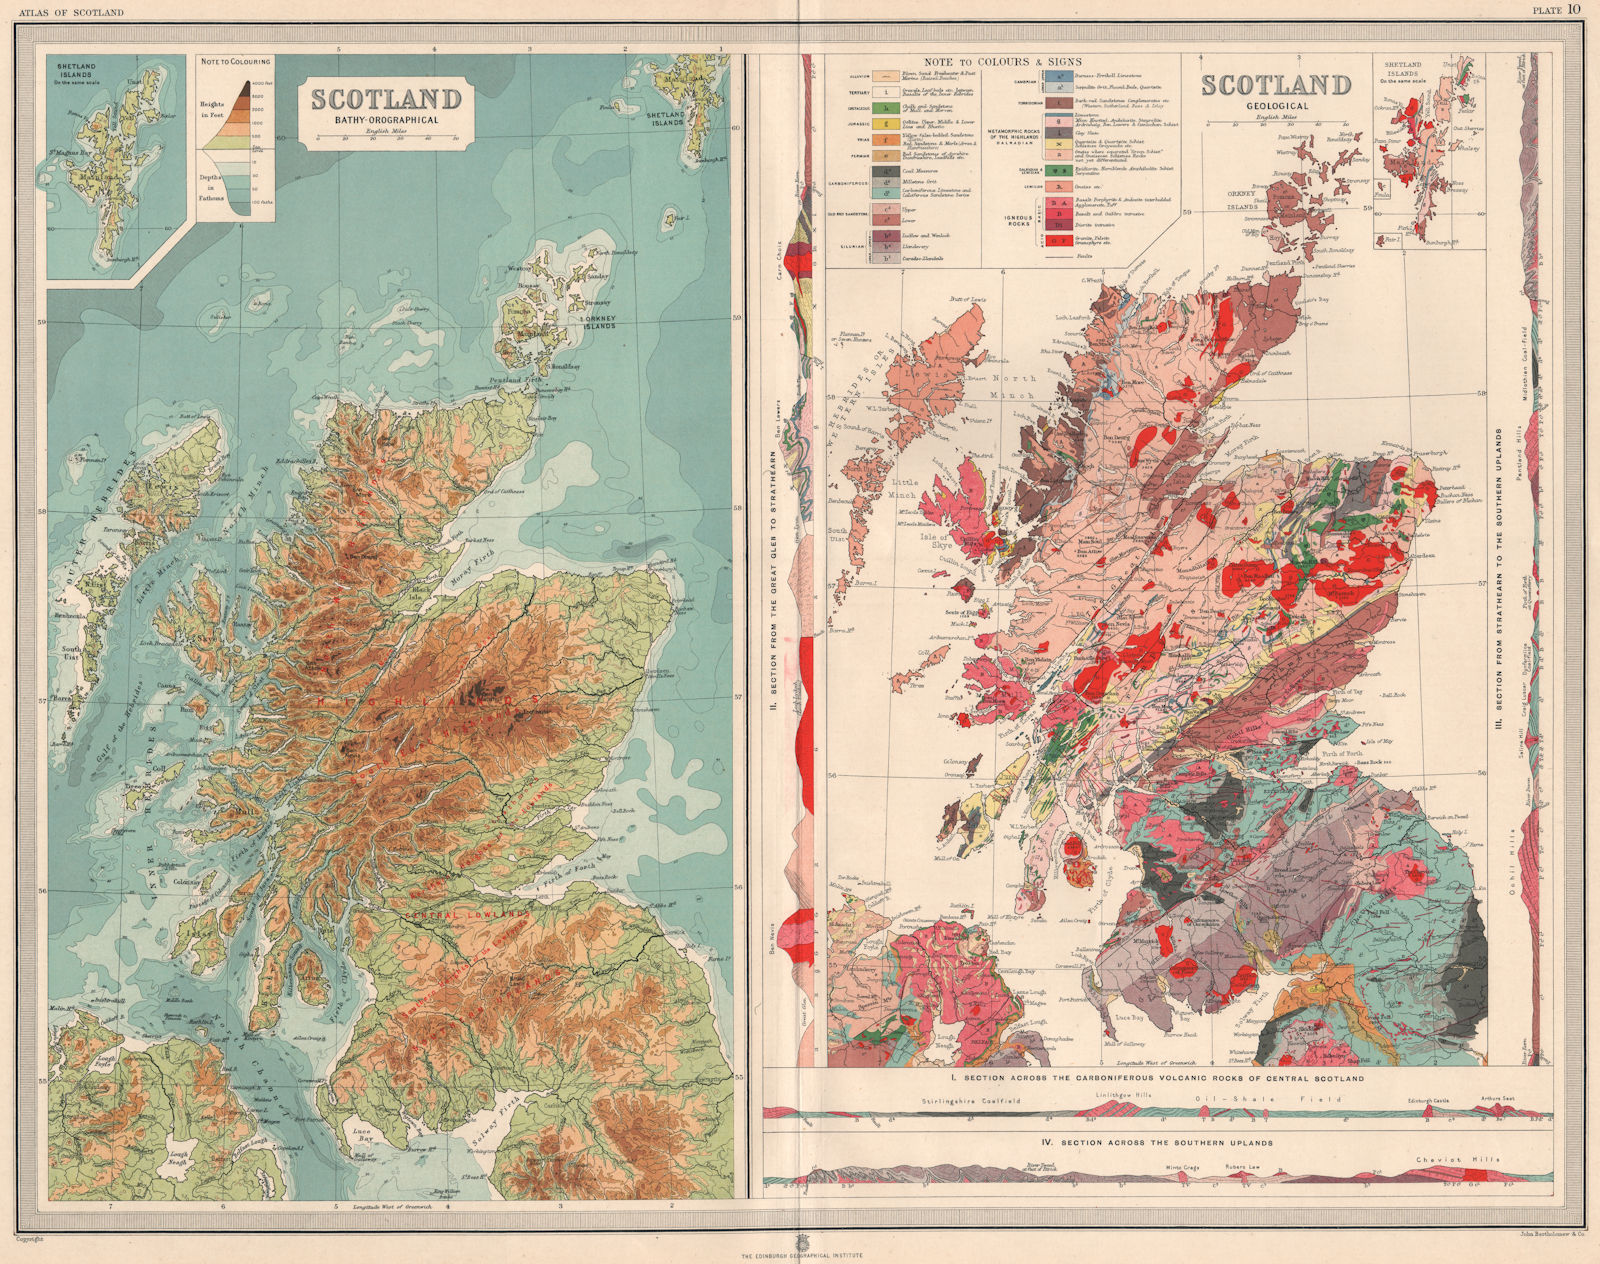 SCOTLAND. Geological with sections. Relief. Geology. LARGE 1912 old map